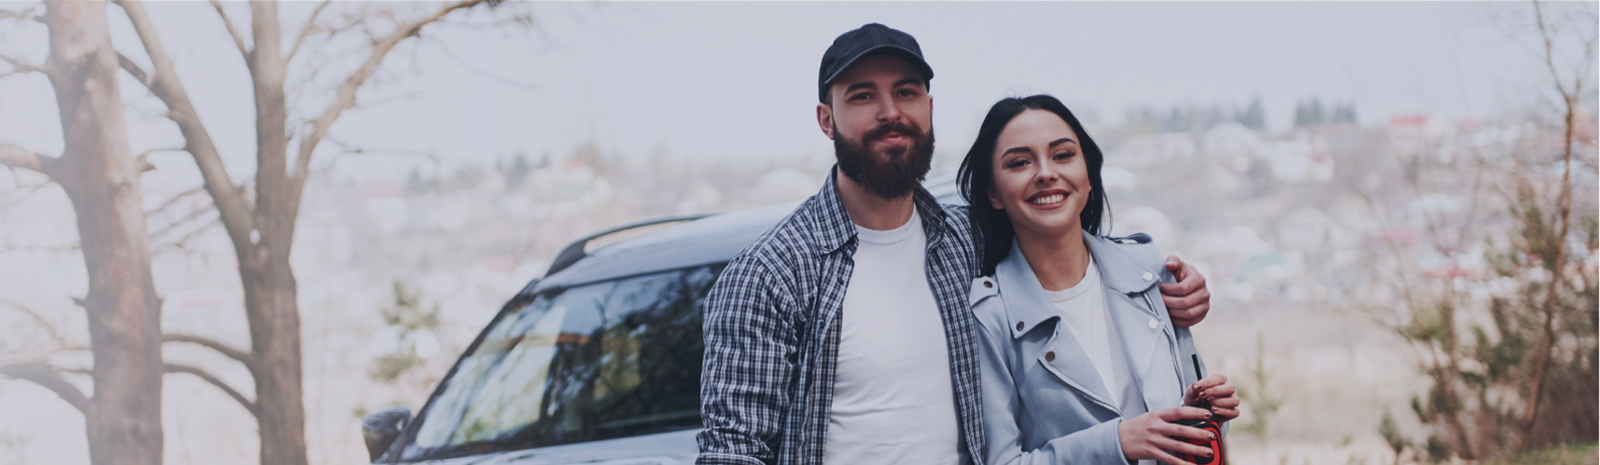 Man and woman in front of a new car